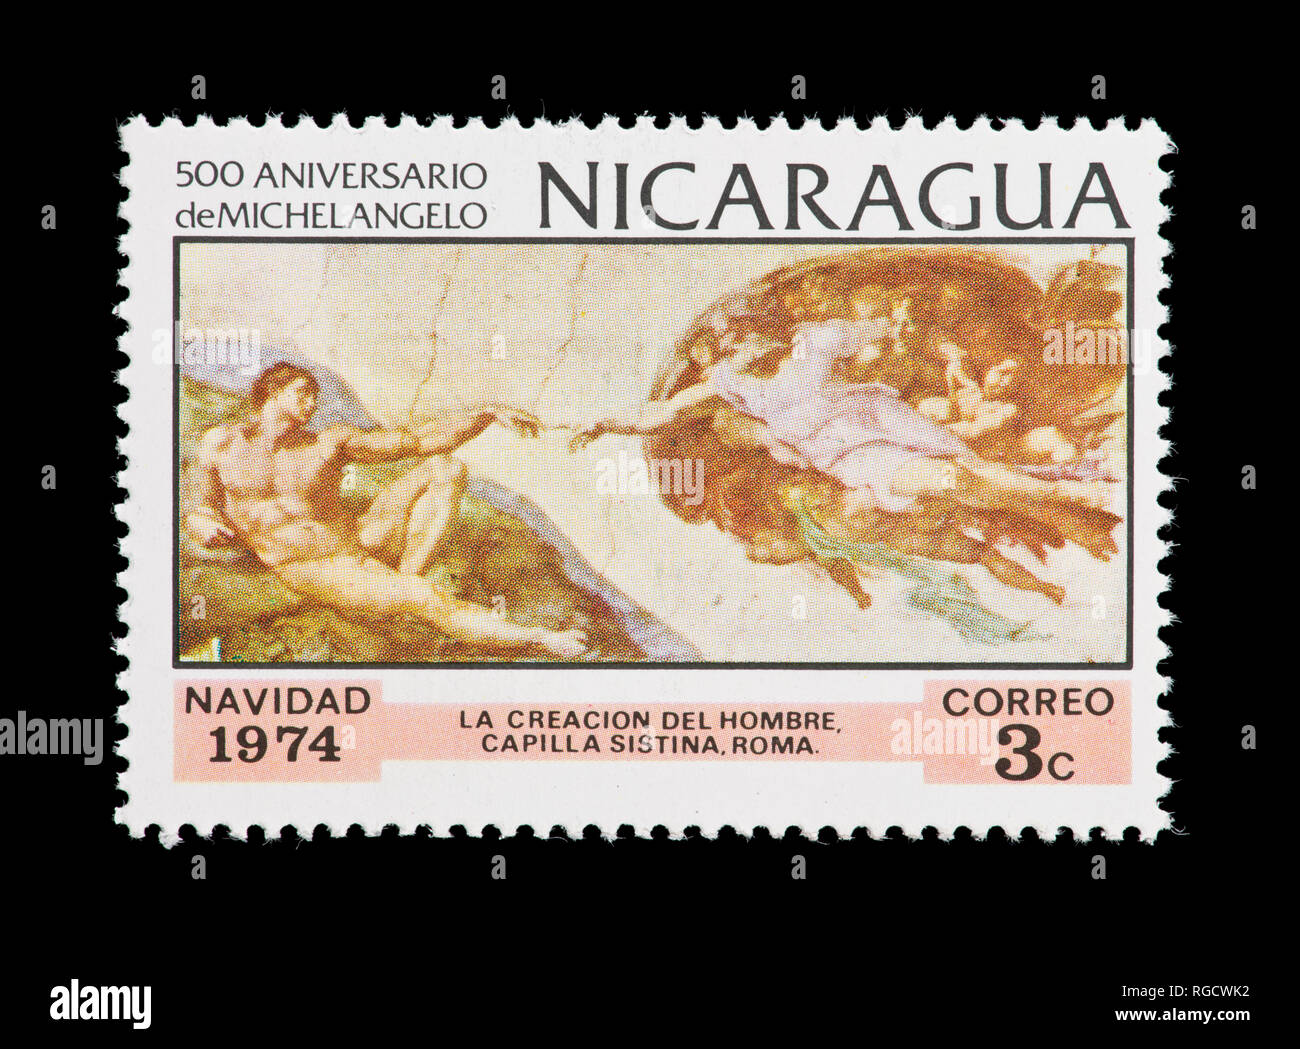 Postage stamp from Nicaragua depicting Michelangelo's 'The Creation of Adam', issued for Christmas and 500th anniversary of birth of Michelangelo. Stock Photo